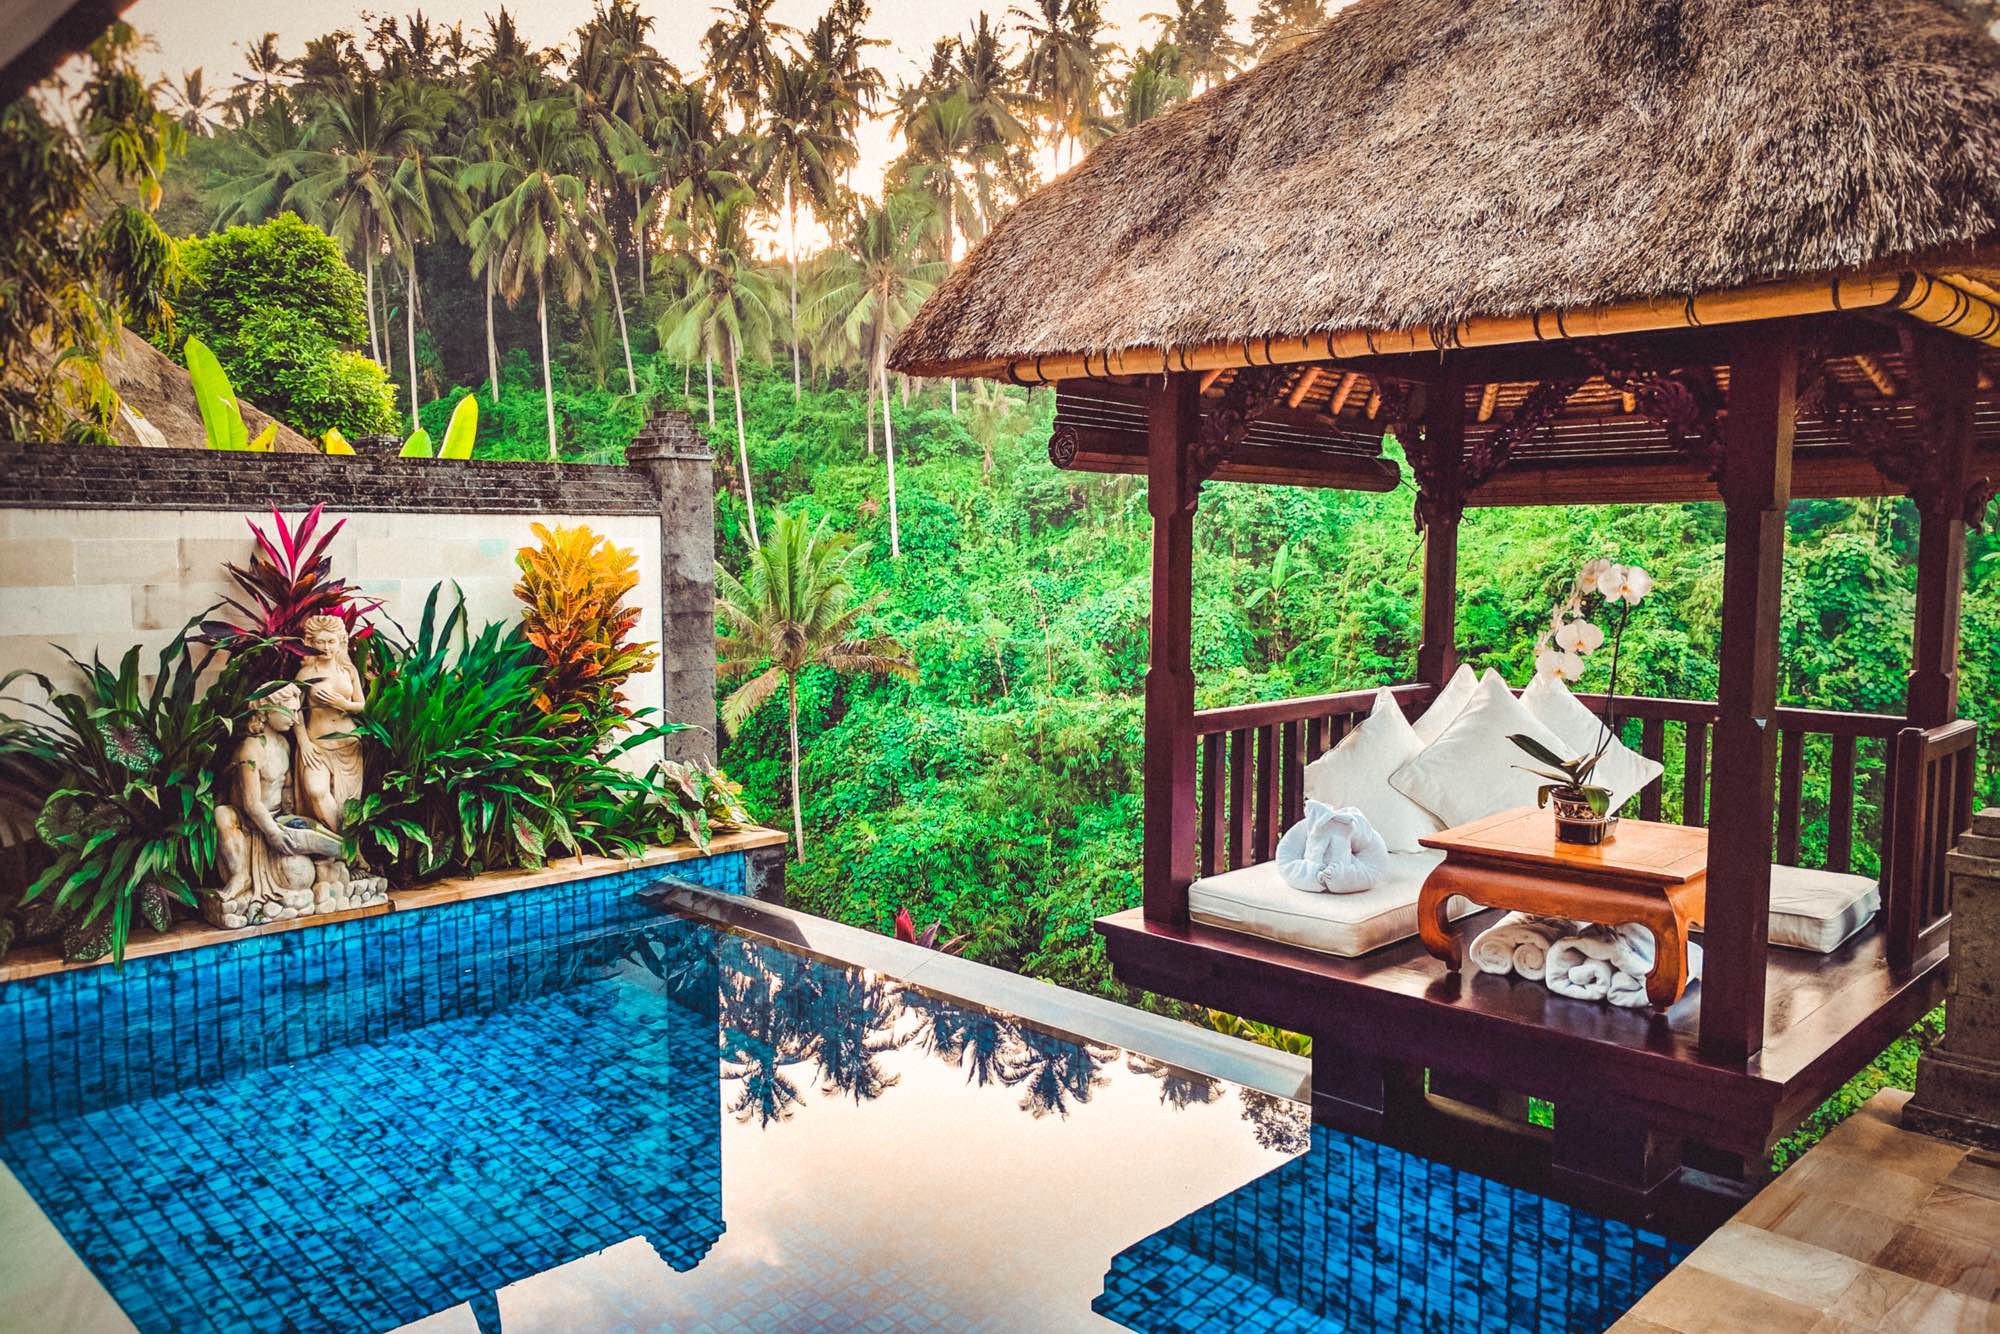 The Best Hotel In Bali Is Now Bookable Using Points...